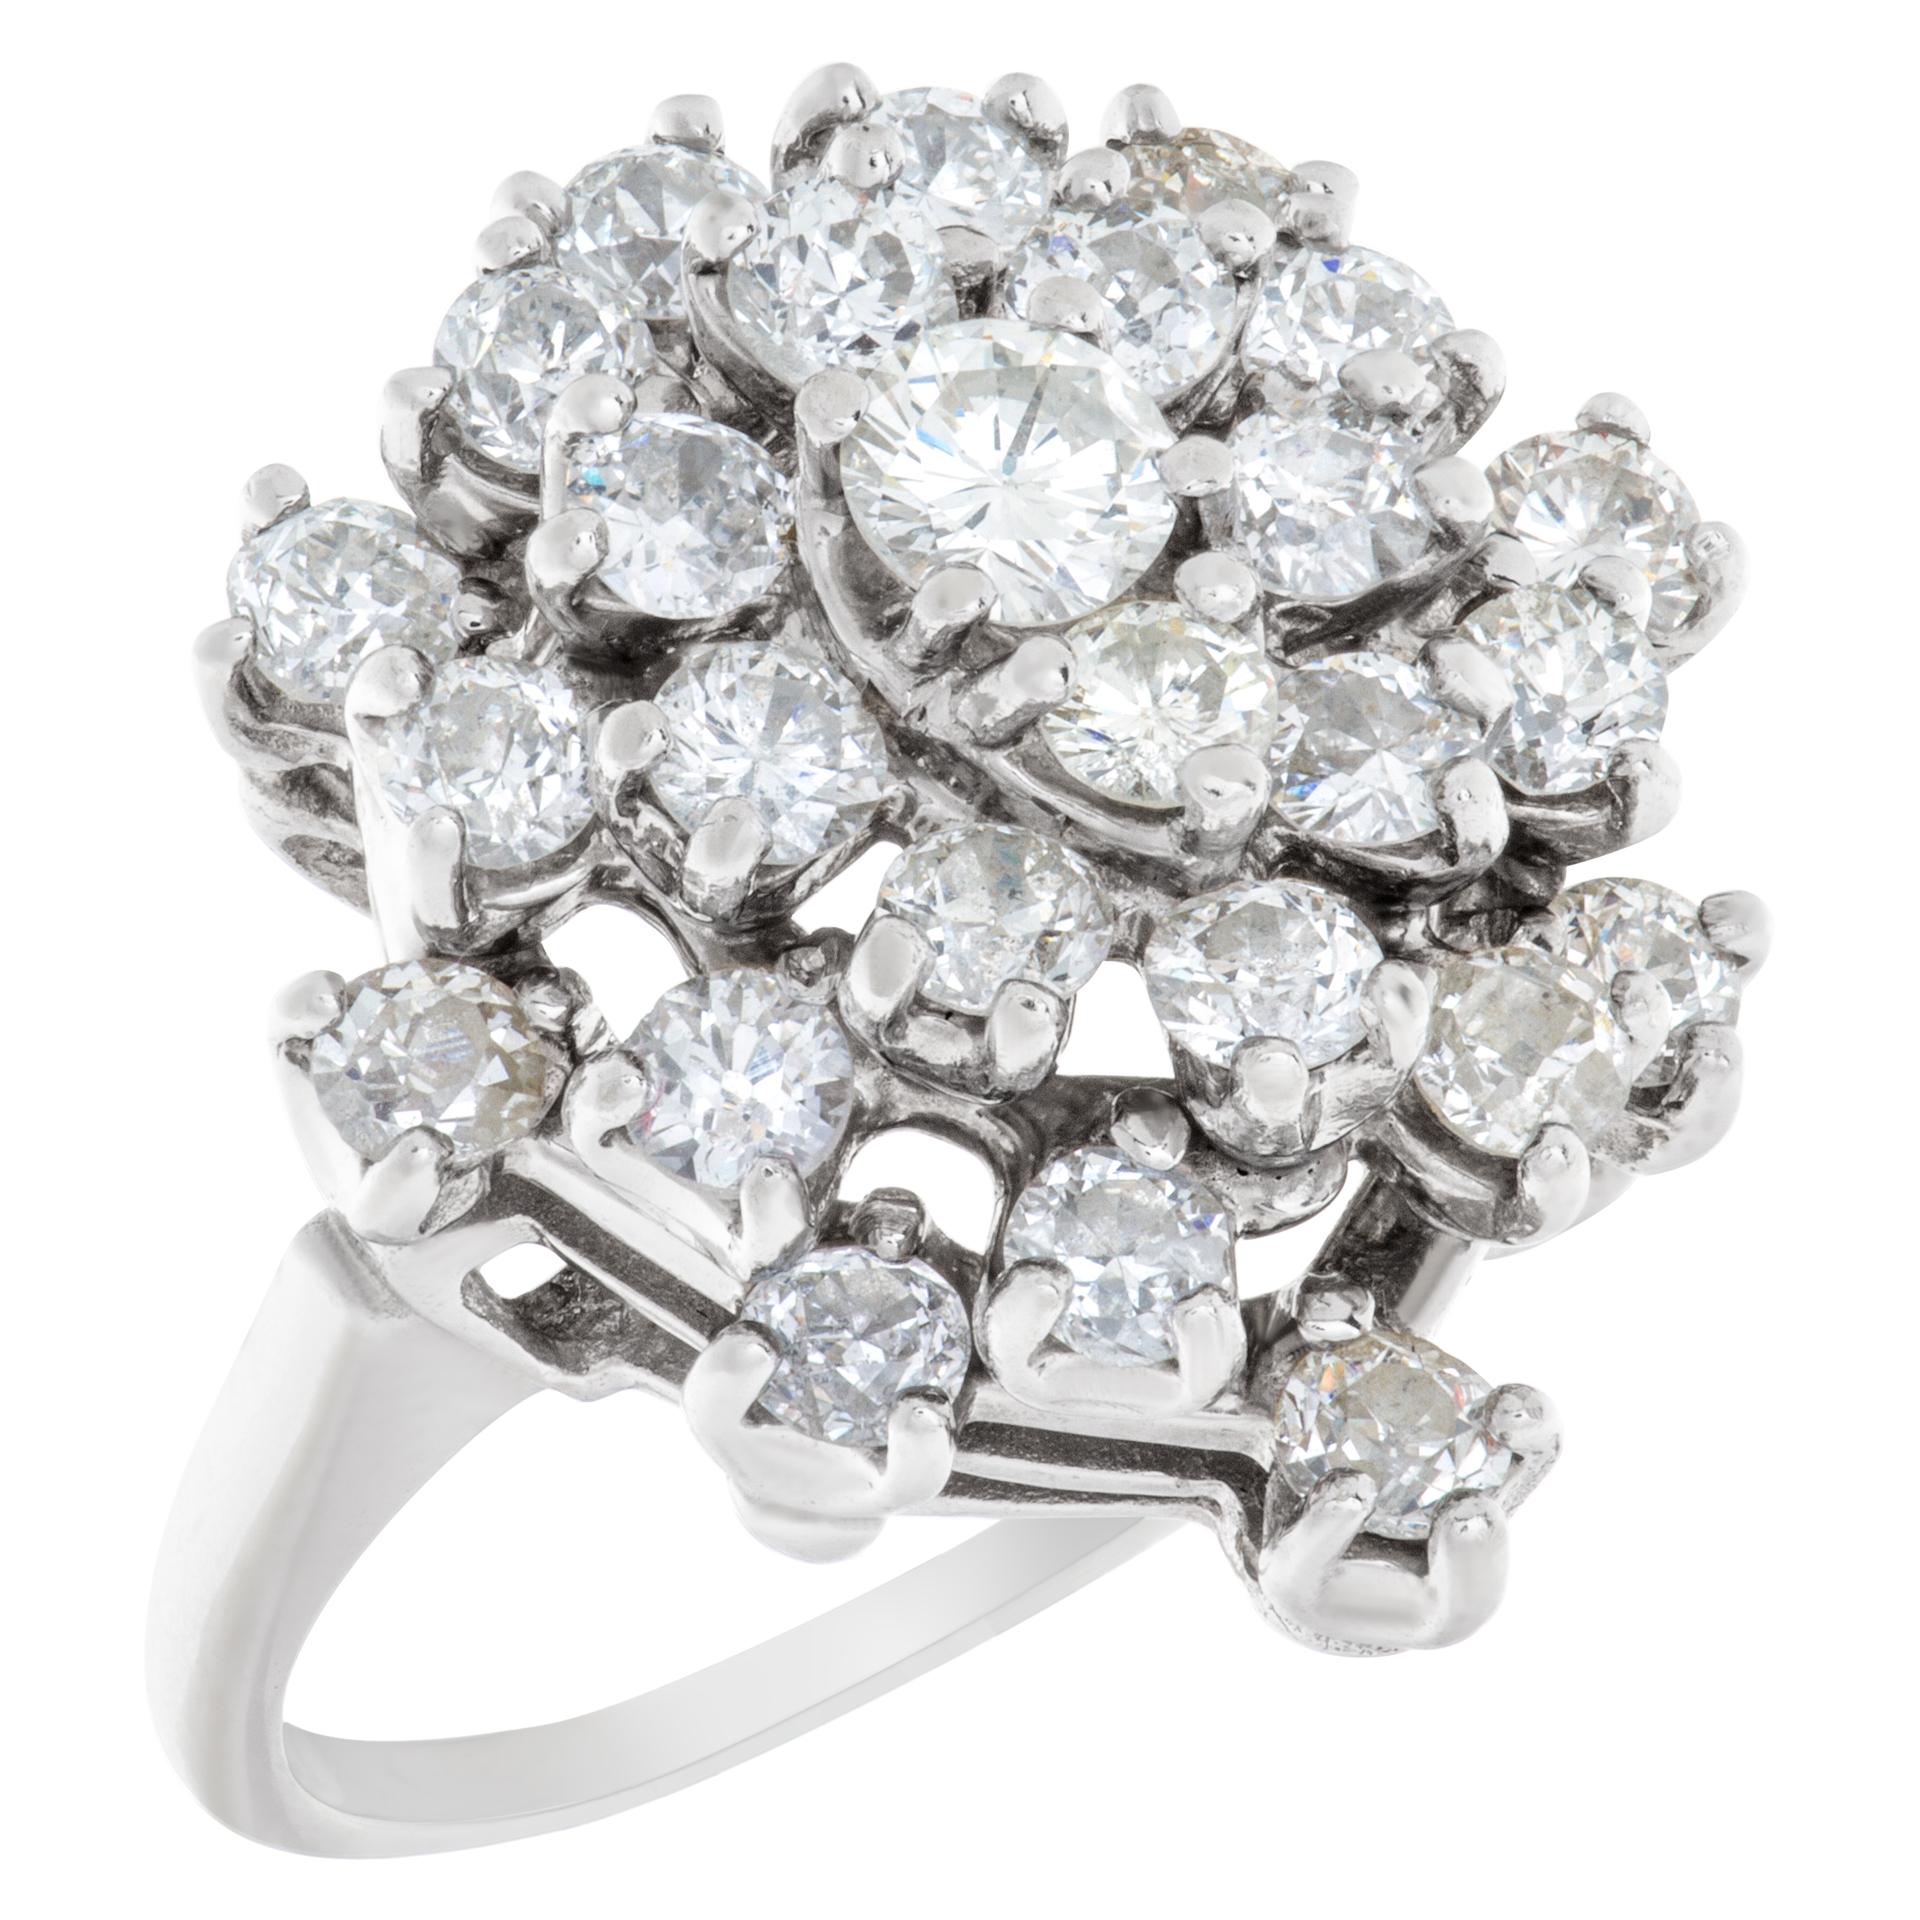 Diamond cluster ring in 18k white gold In Excellent Condition For Sale In Surfside, FL